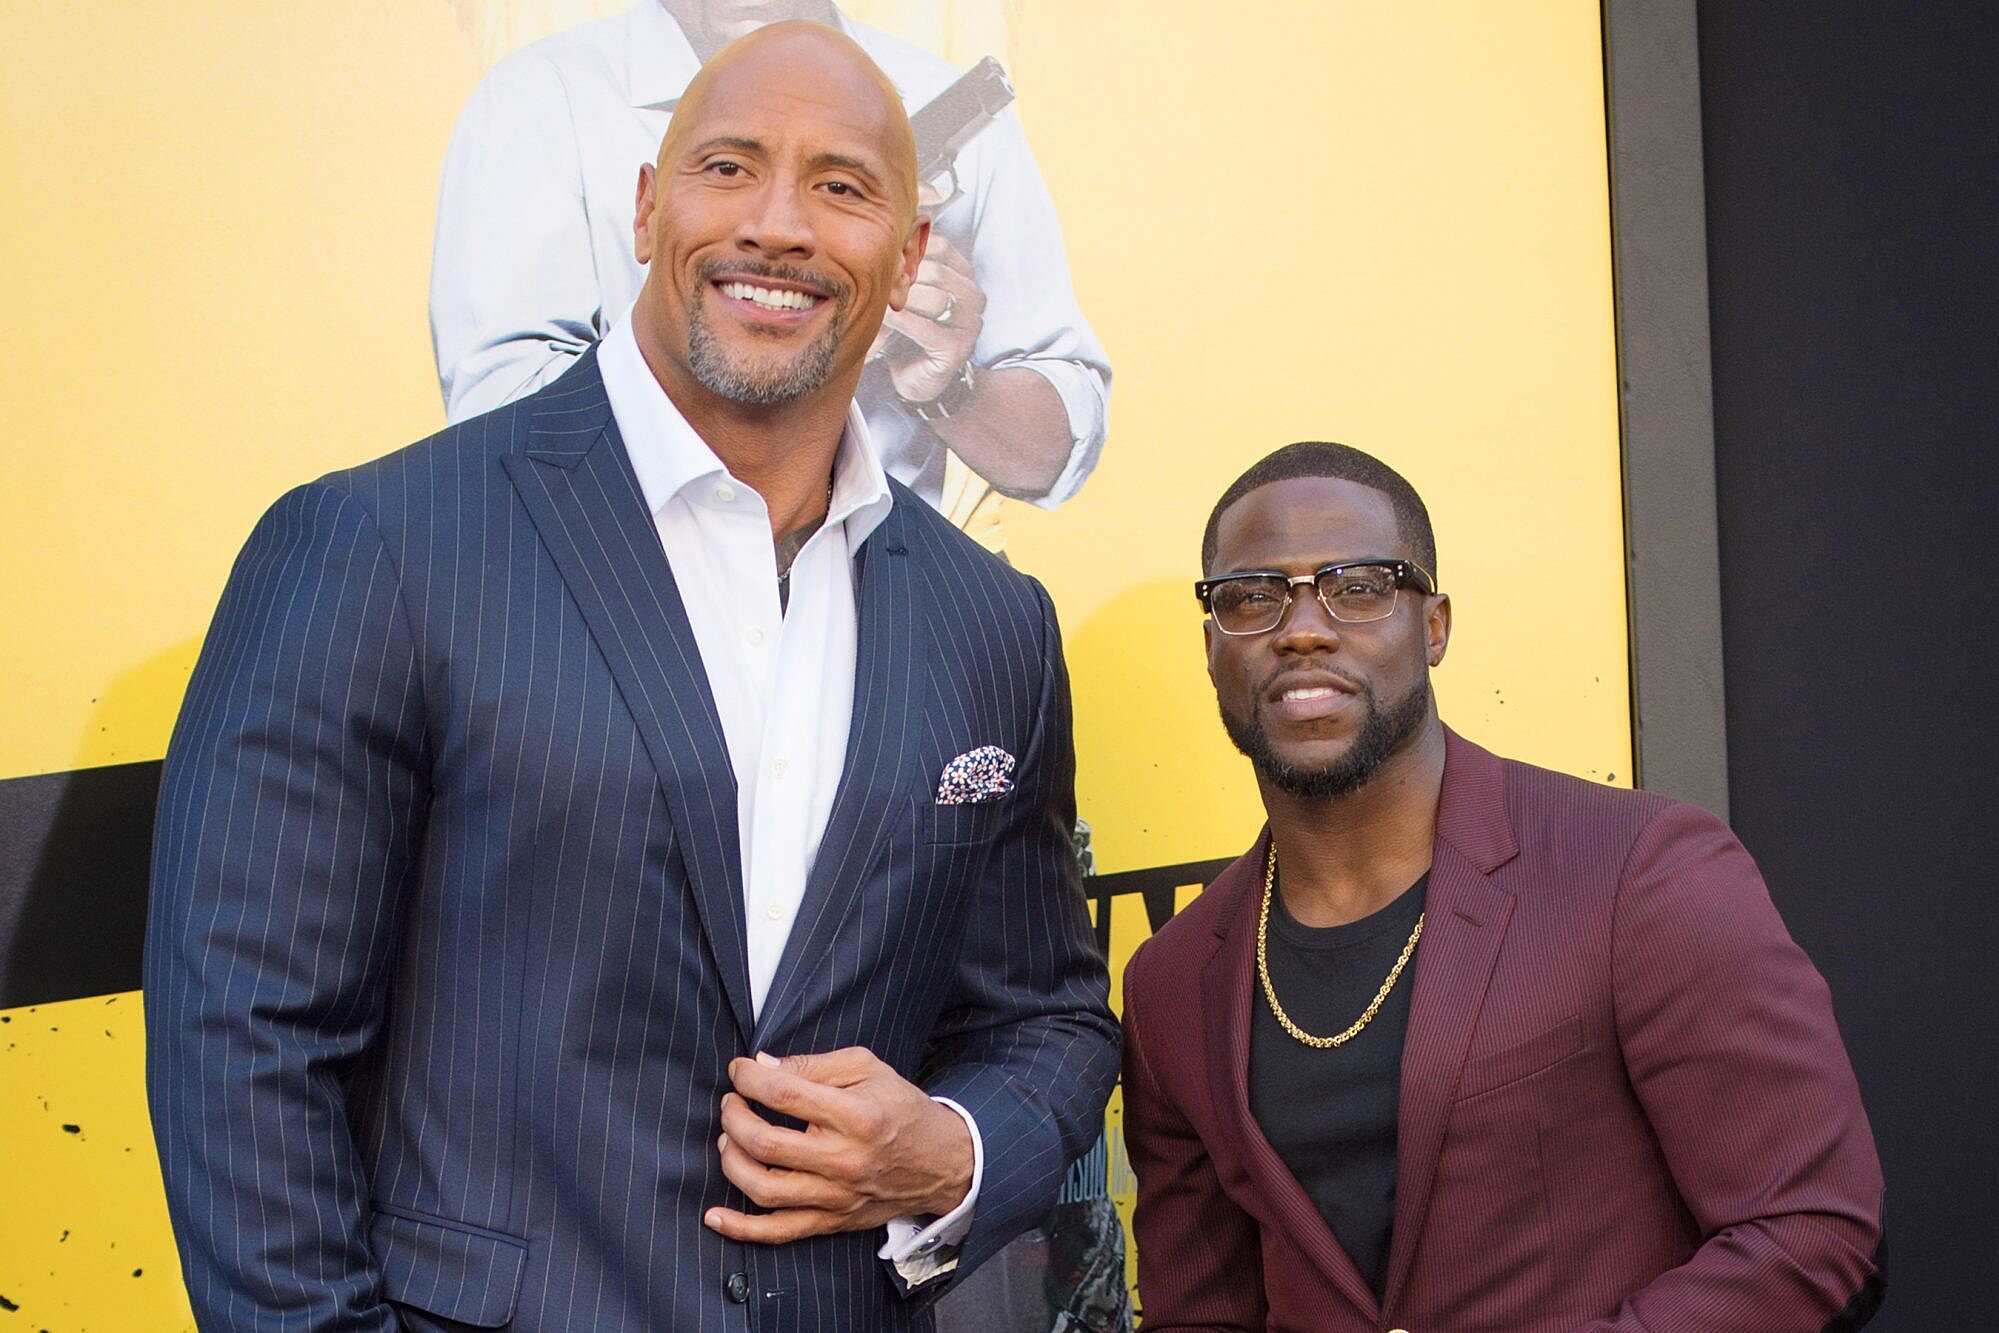 Which movies have The Rock and Kevin Hart starred in?